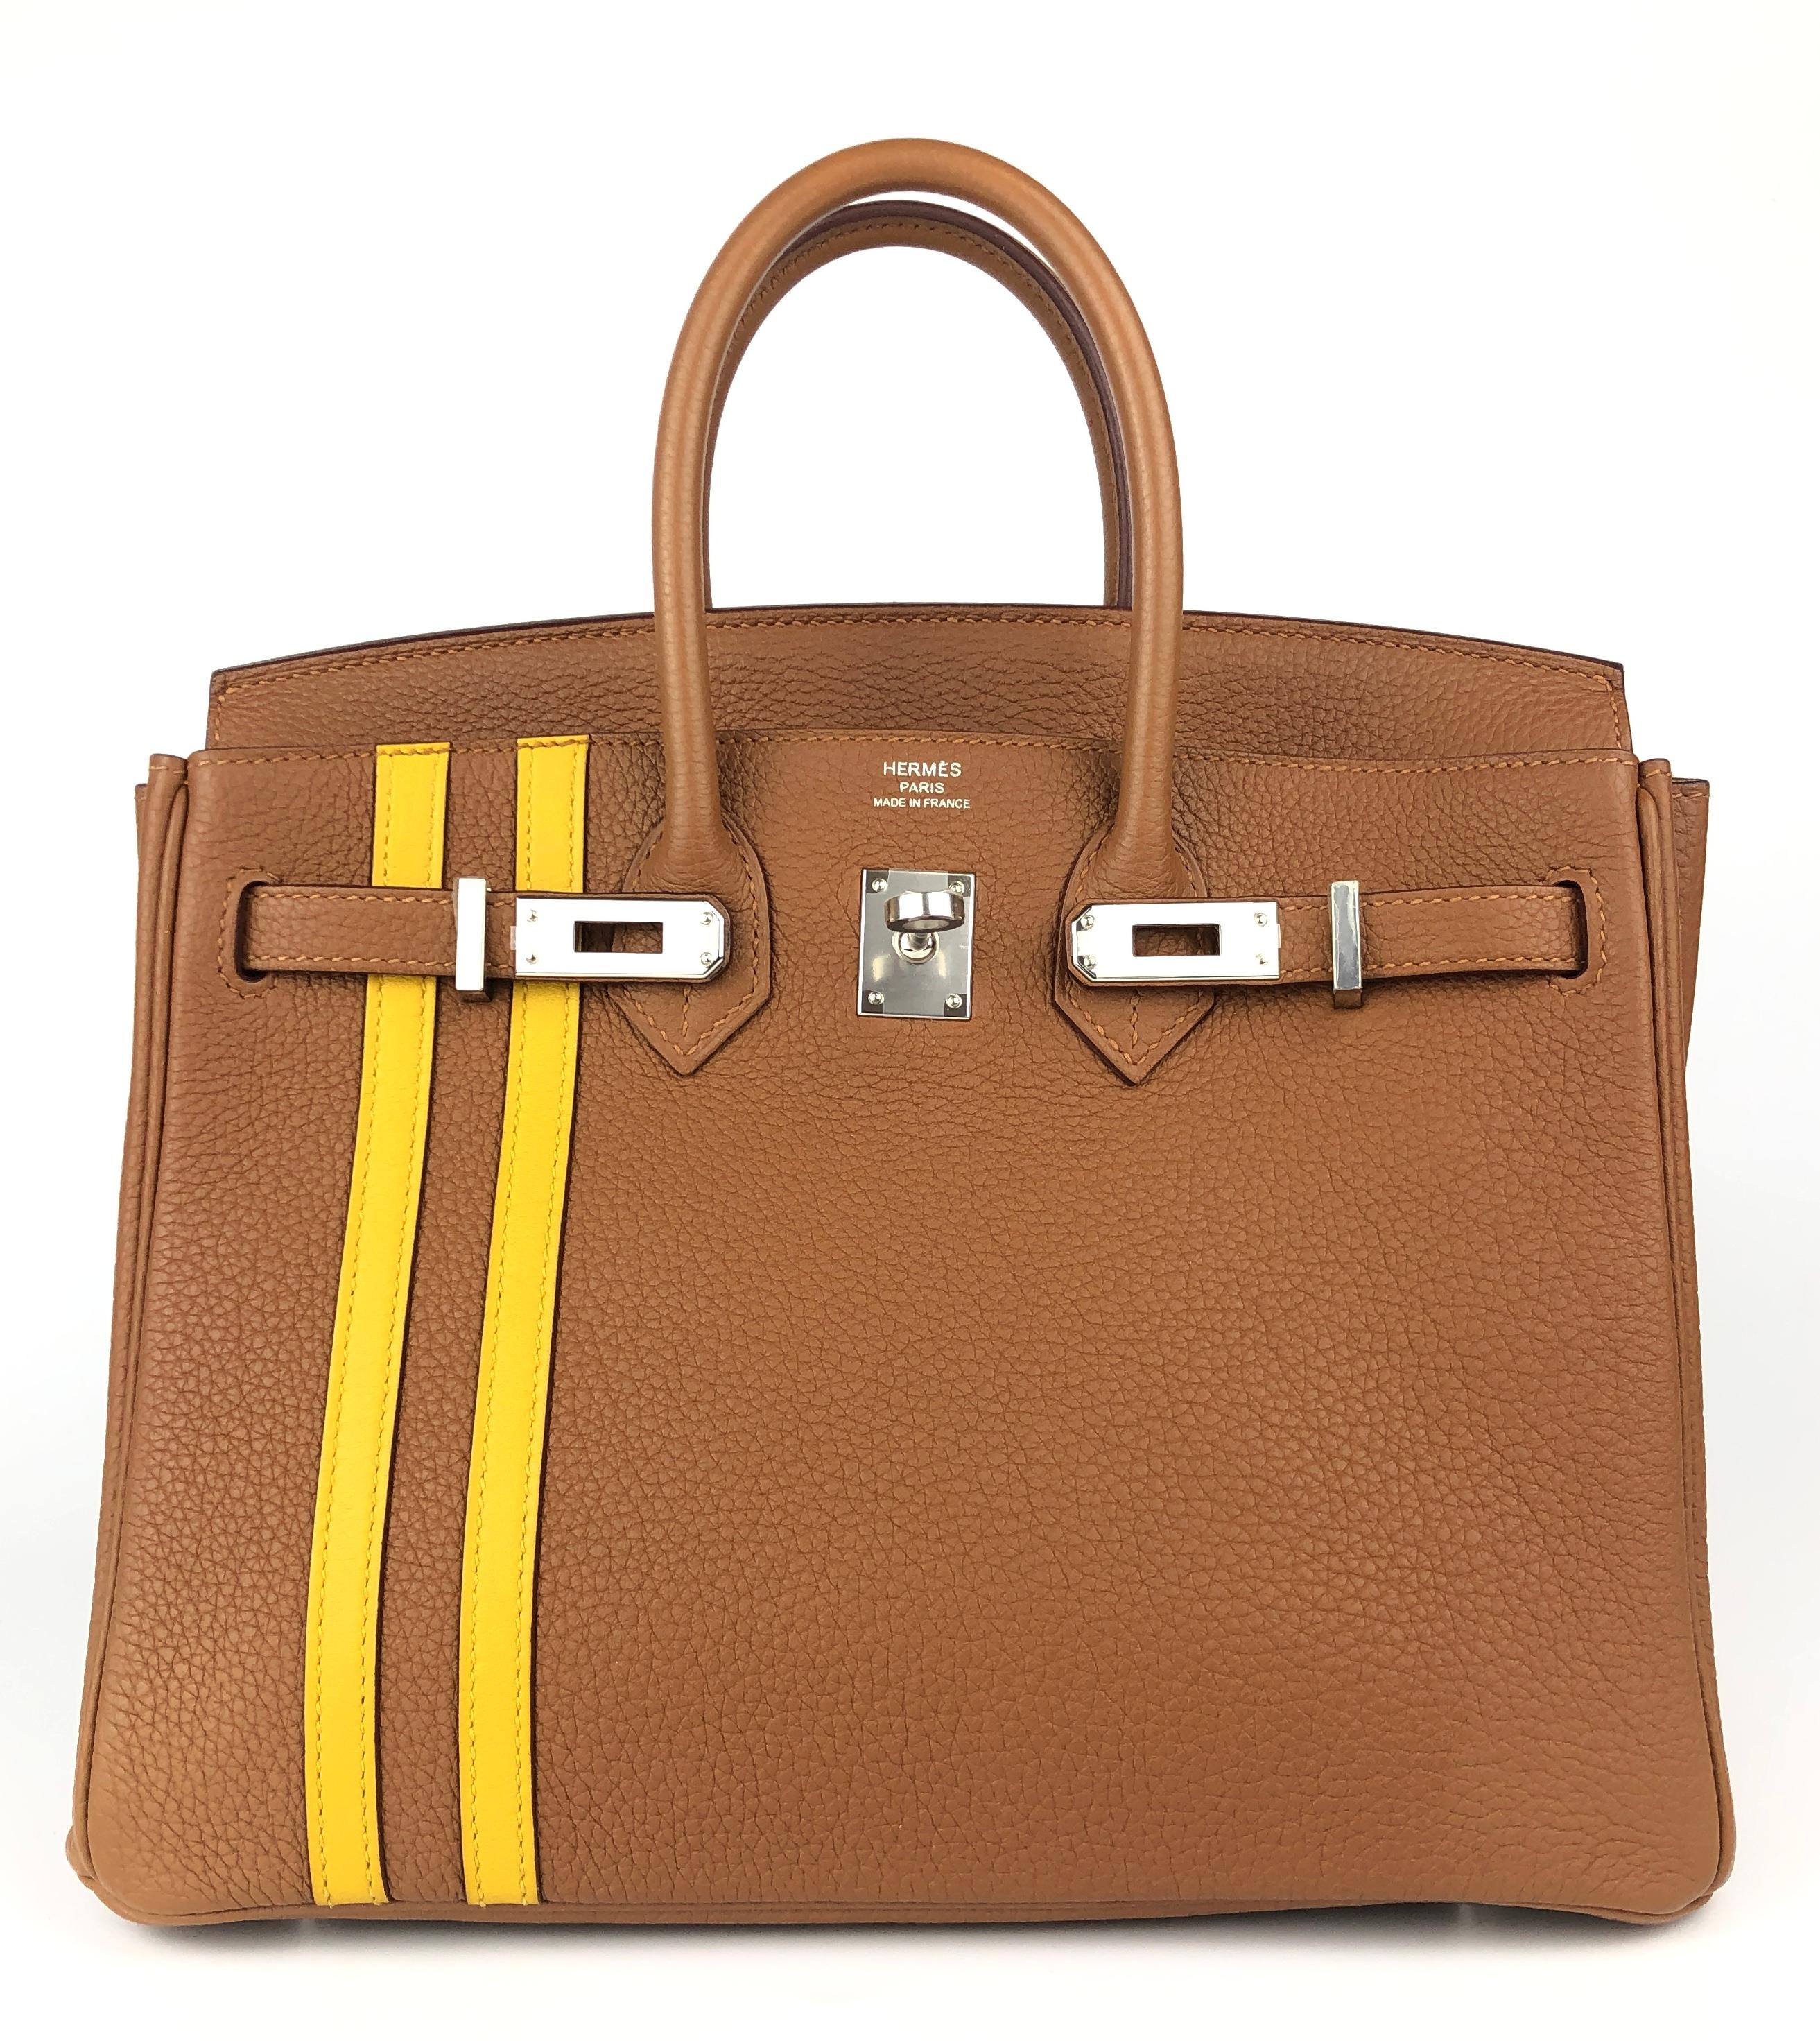 Absolutely Stunning and One The Most Coveted and Difficult to get Hermes Combos! Limited Edition Hermes Birkin 25 Officer Gold Togo and June Ambre Yellow Leather complimented by Palladium Hardware. C Stamp 2018. Pristine Condition Almost Like New.